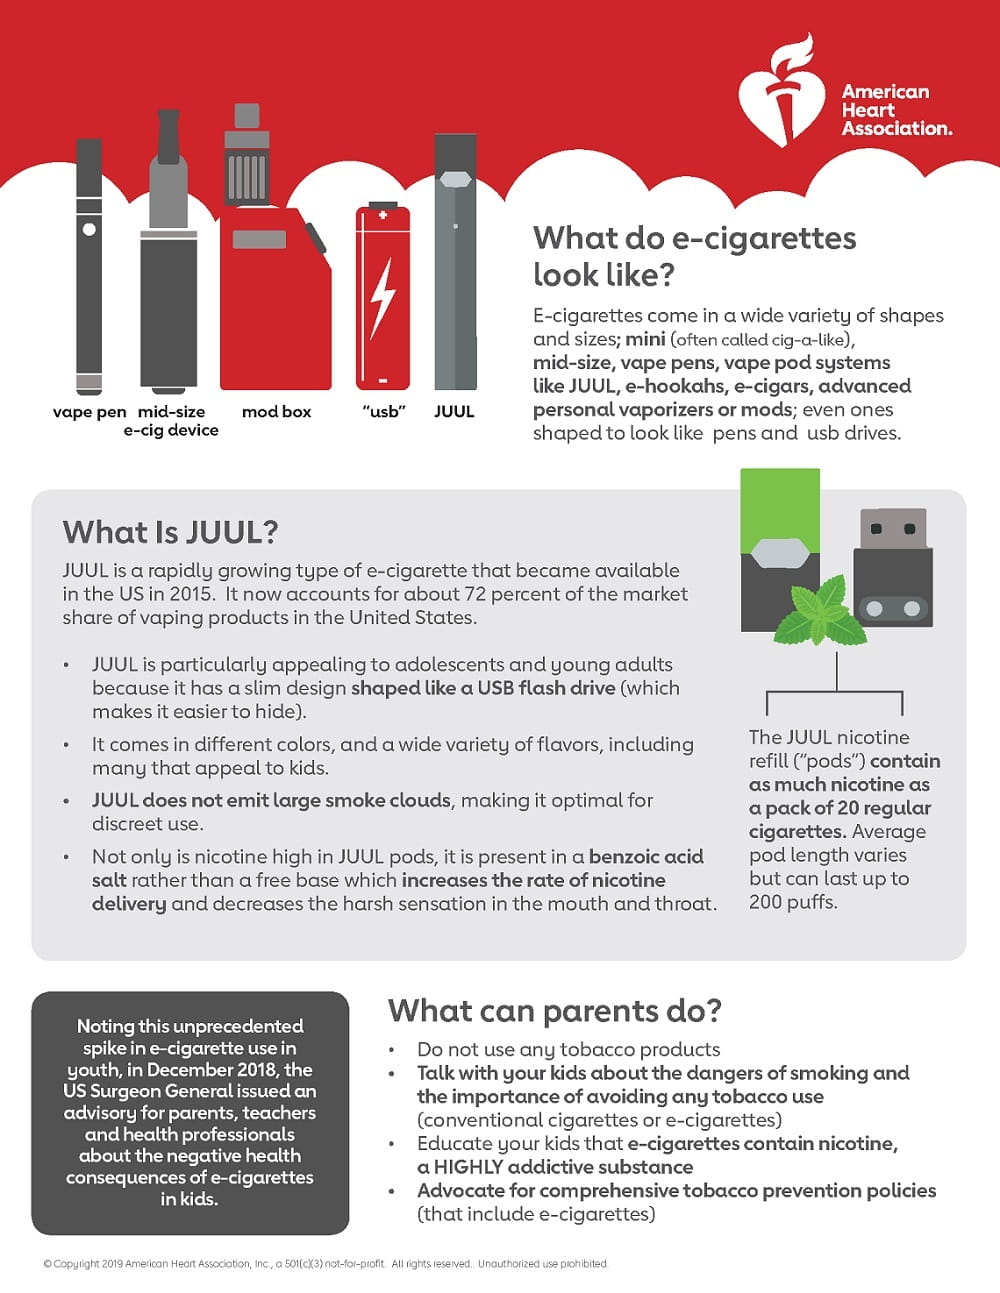 Quick Facts on the Risks of E-cigarettes for Kids, Teens, and Young Adults